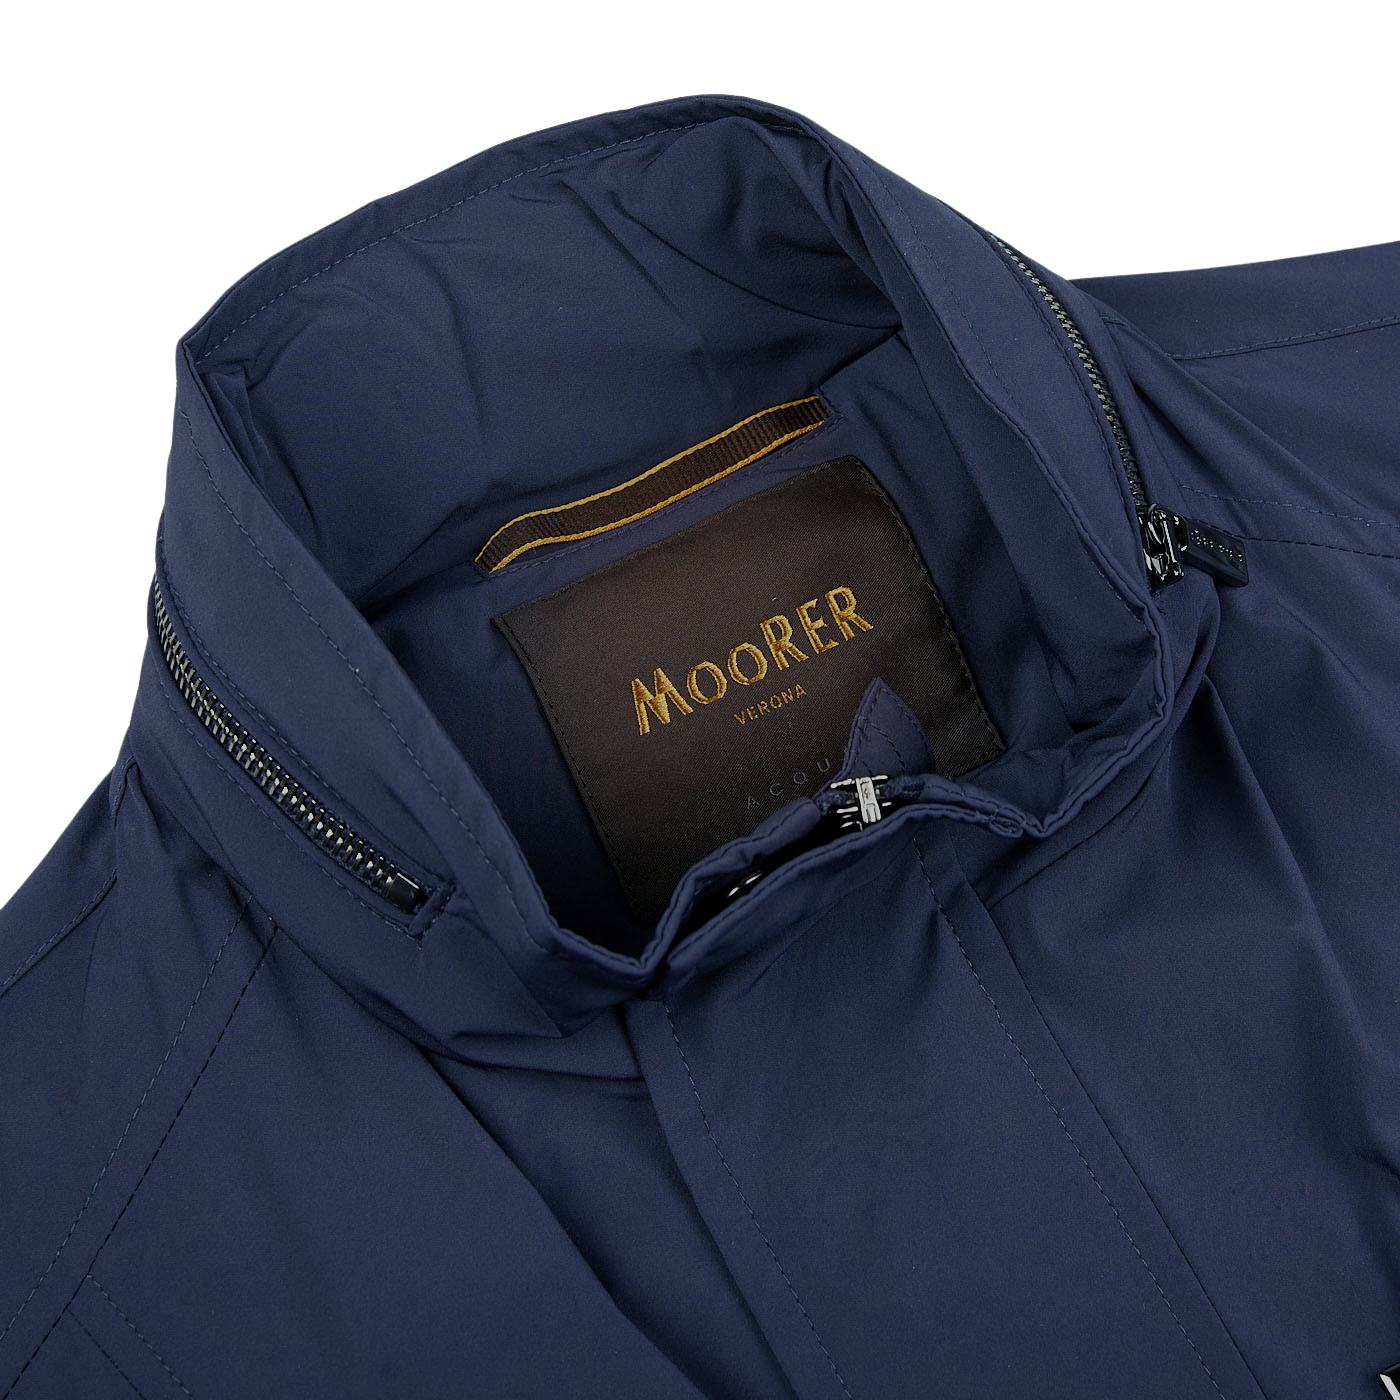 A Dark Blue Lightweight Nylon field jacket with the word Moorer on the back.